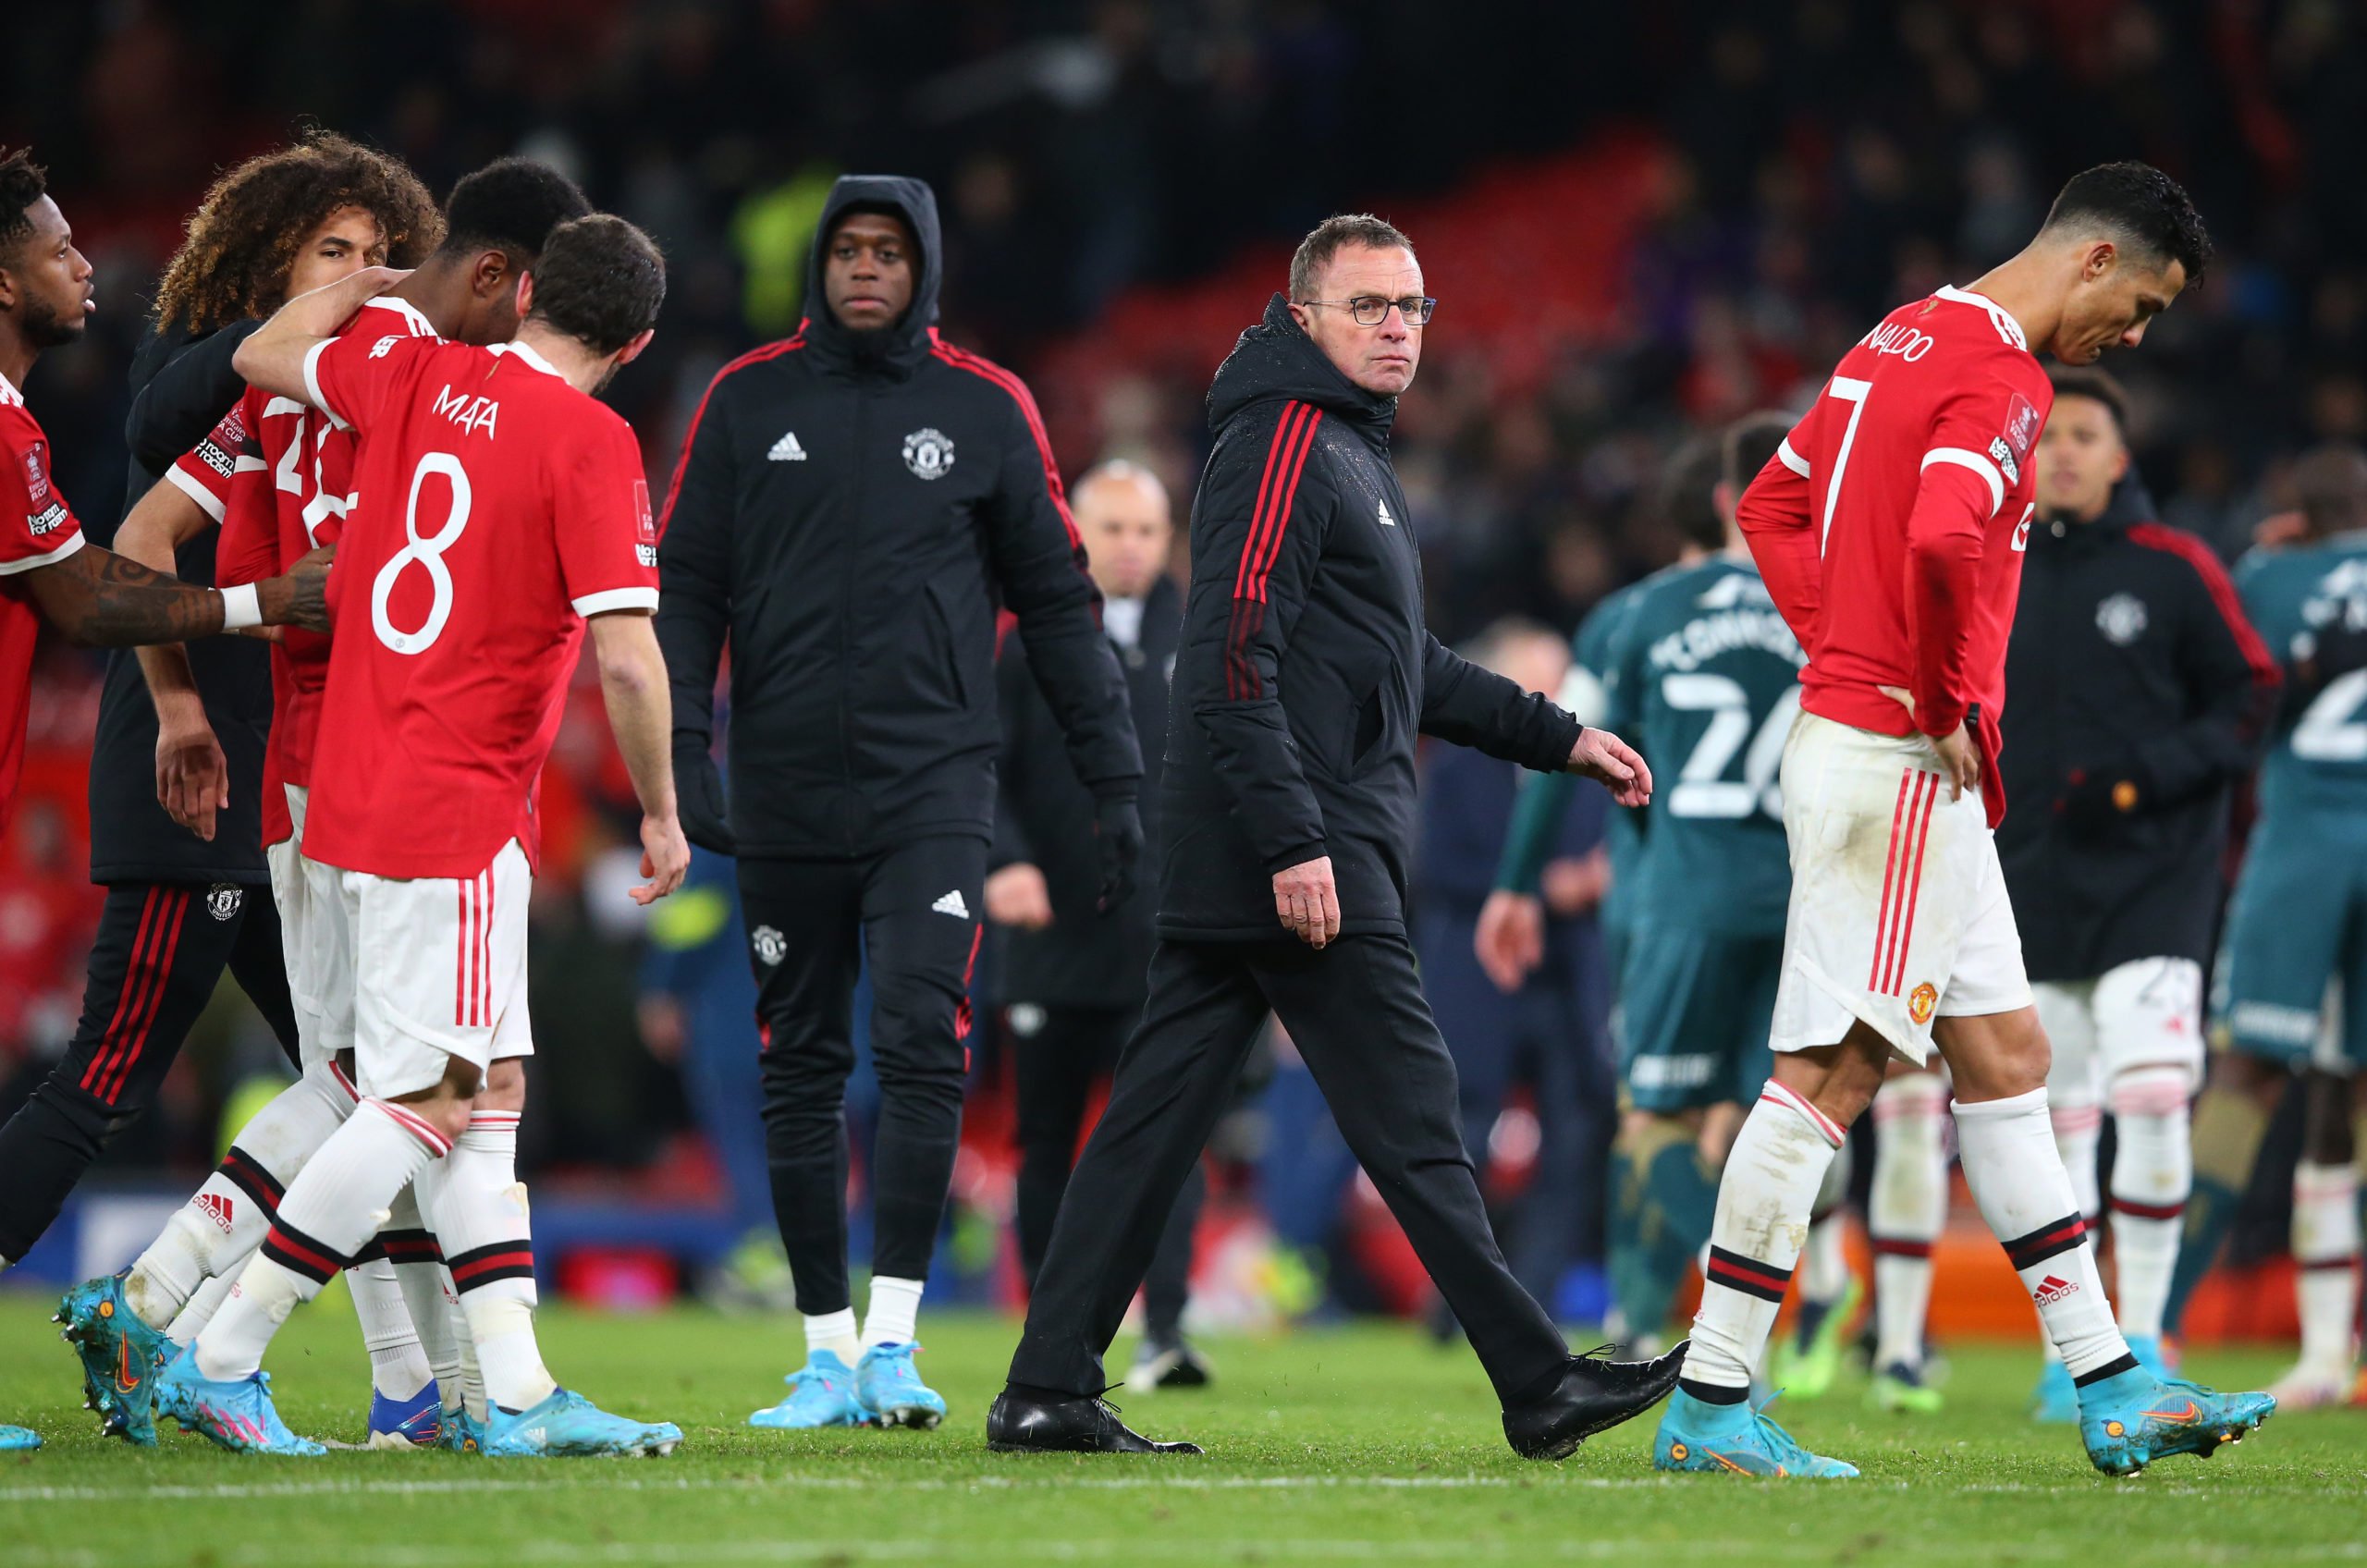 'Other teams like Chelsea': Ralf Rangnick makes FA Cup claim following Manchester United's exit last Friday